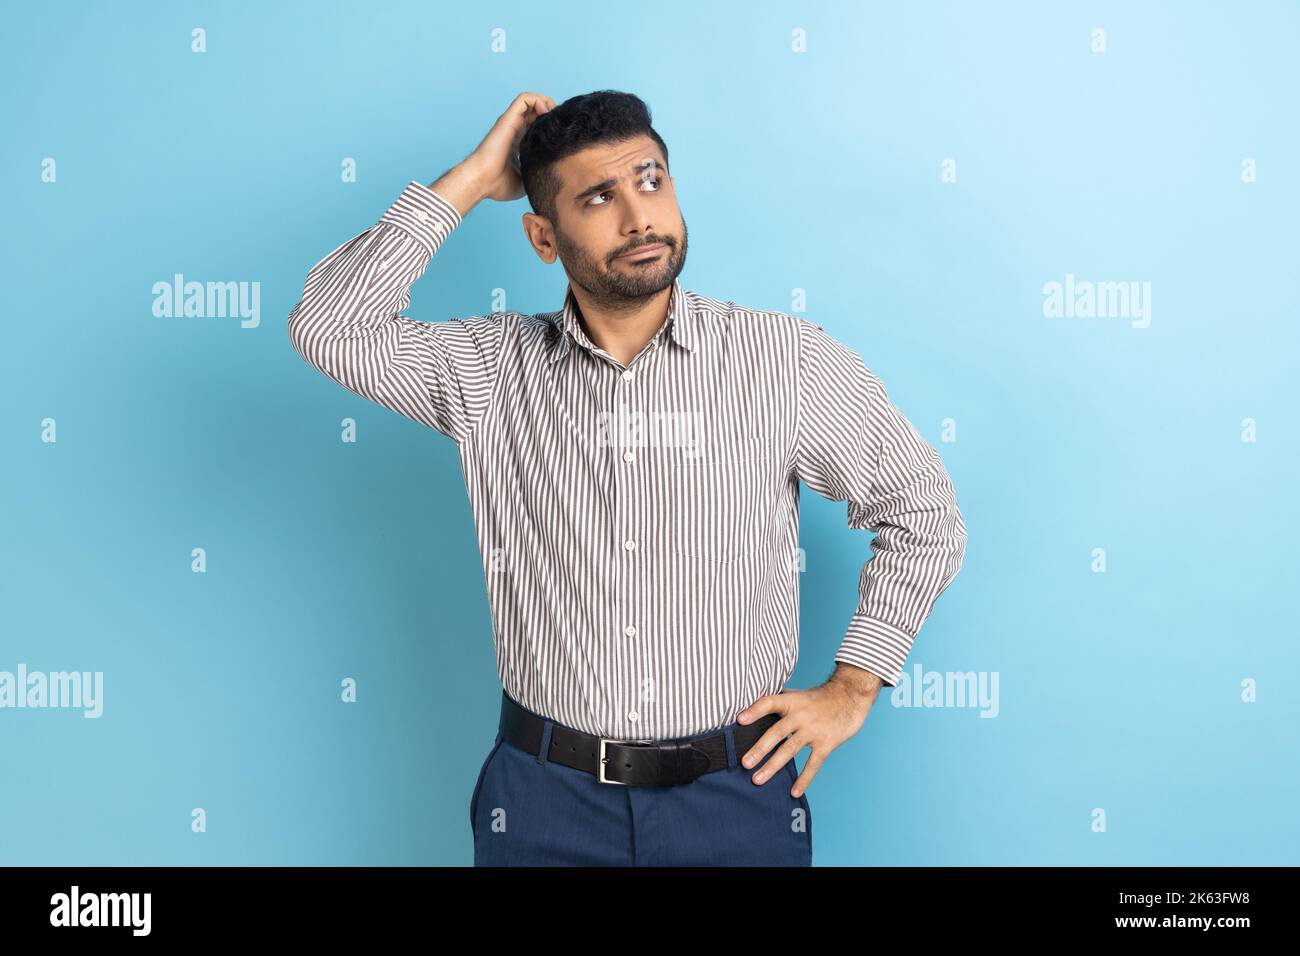 Portrait of young pensive businessman with beard touching head and thinking about important question, making hard decision, wearing striped shirt. Indoor studio shot isolated on blue background. Stock Photo